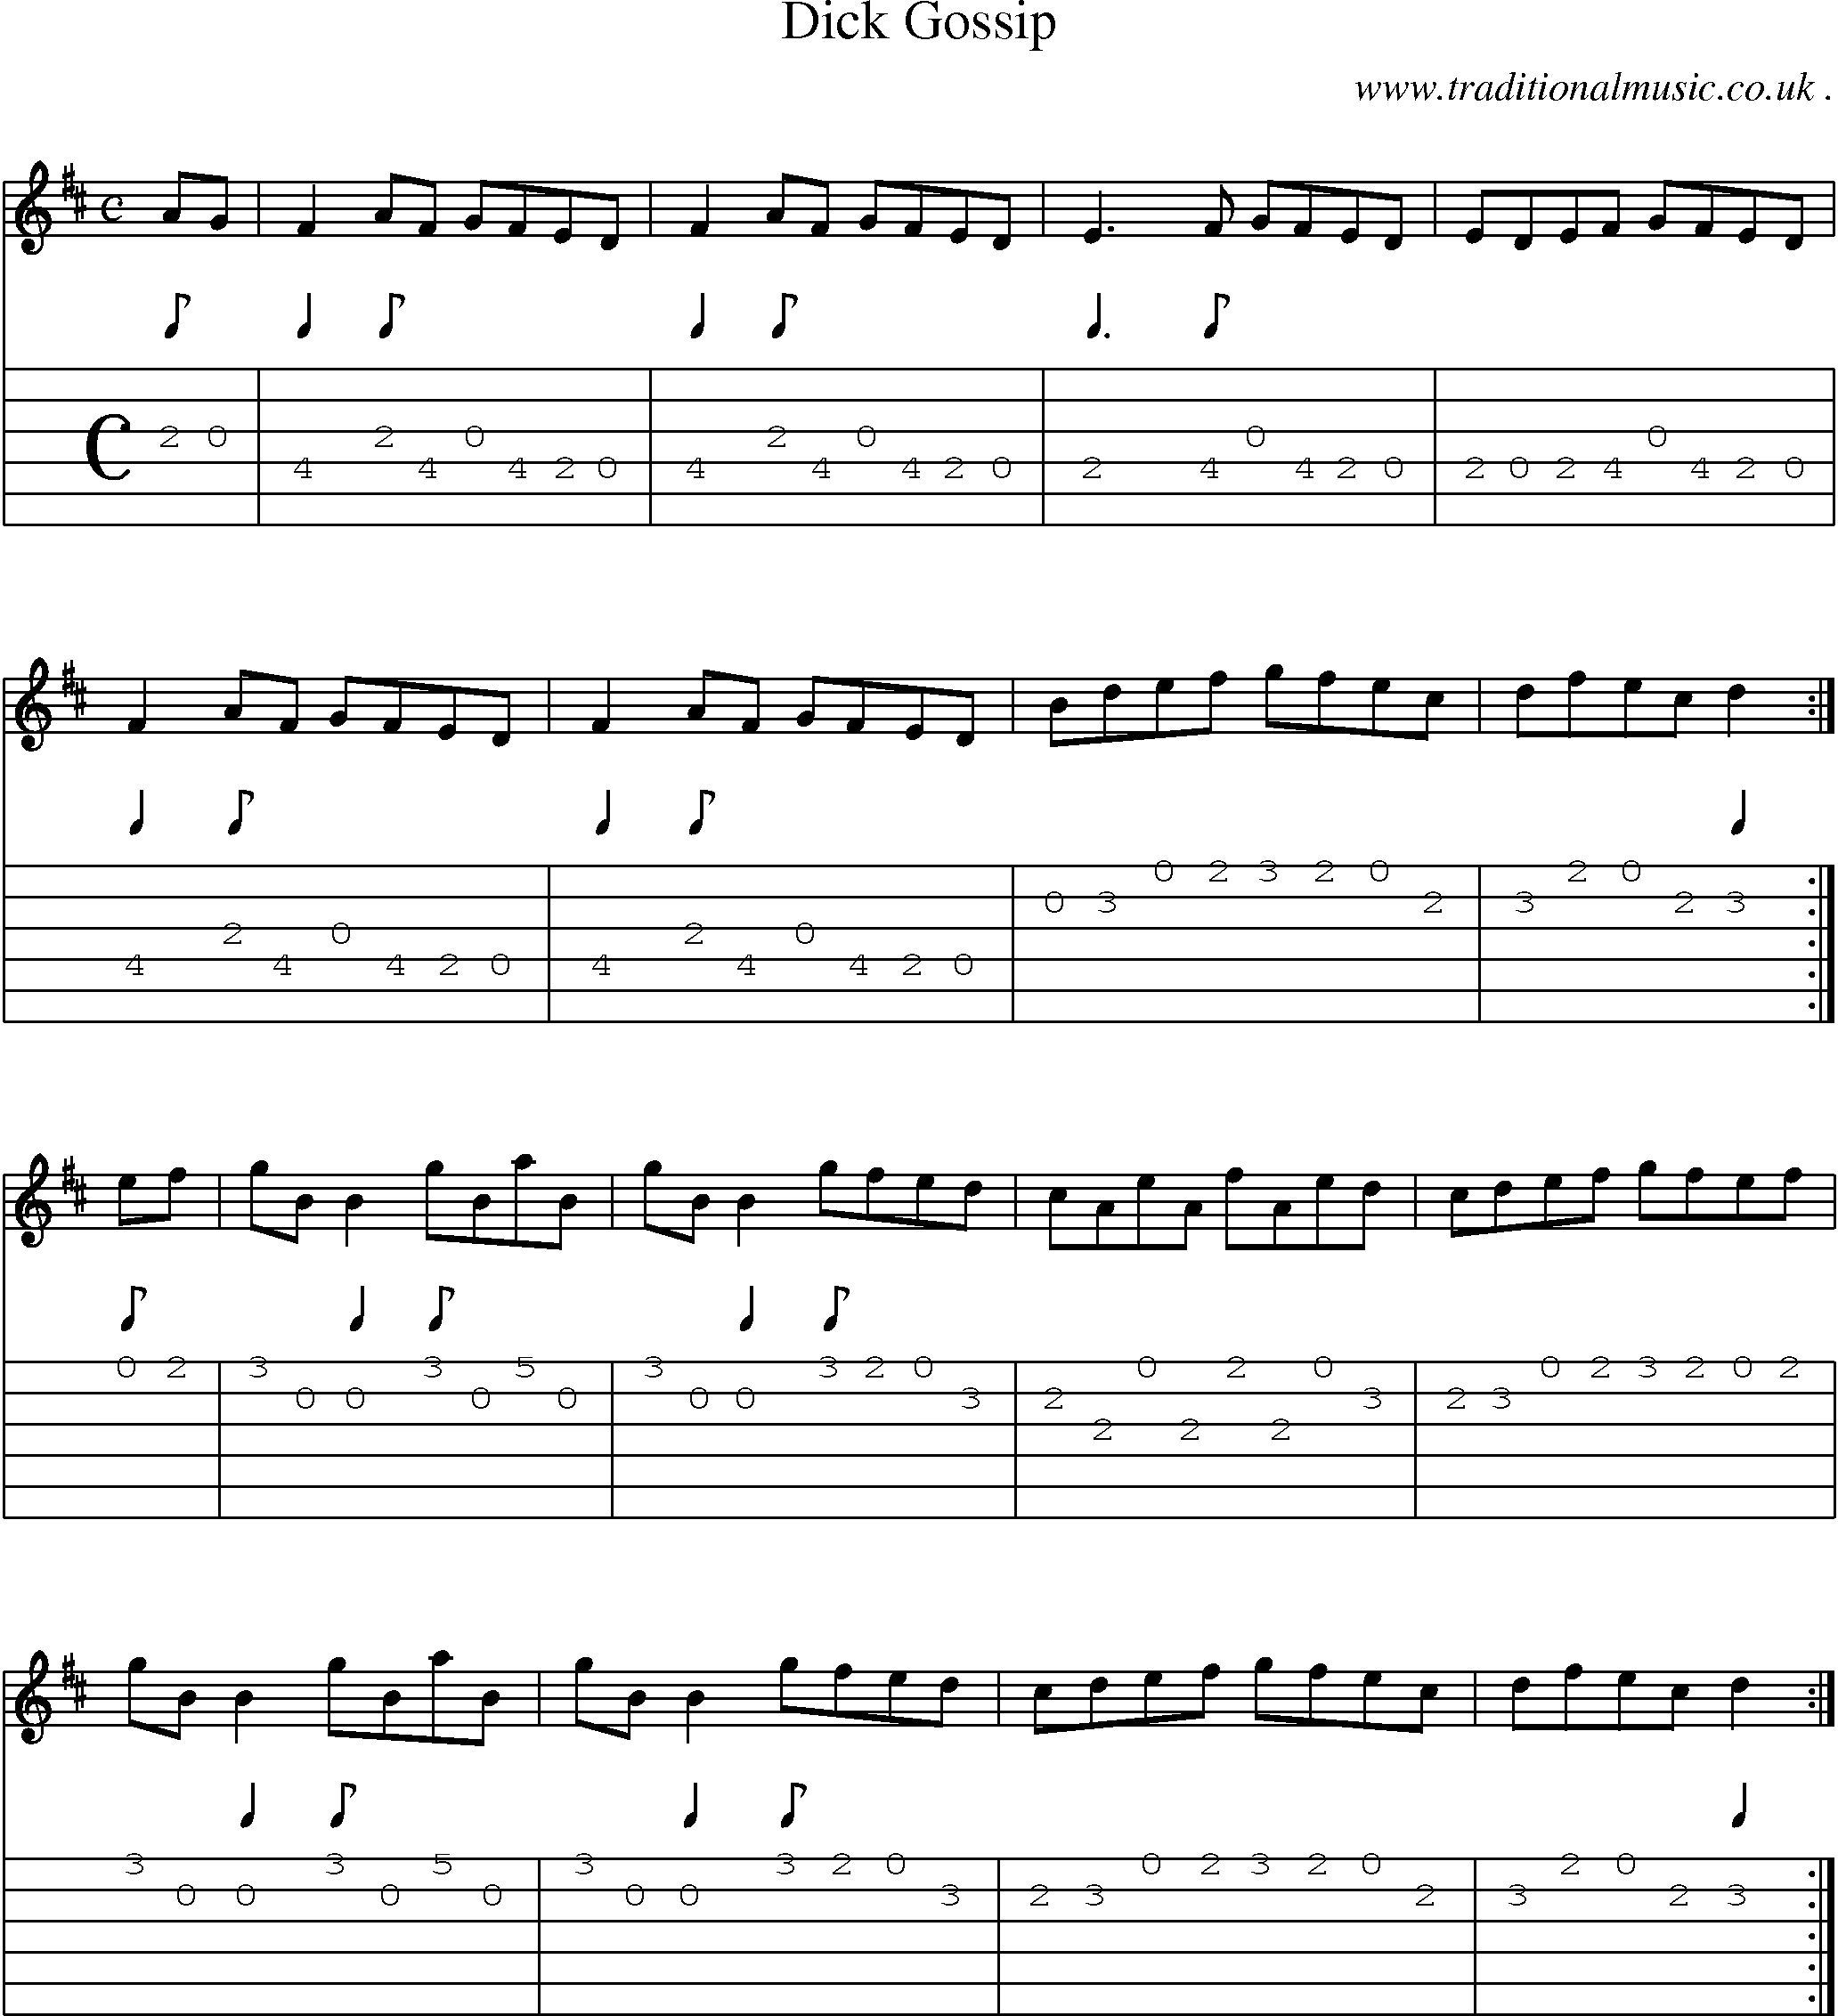 Sheet-Music and Guitar Tabs for Dick Gossip